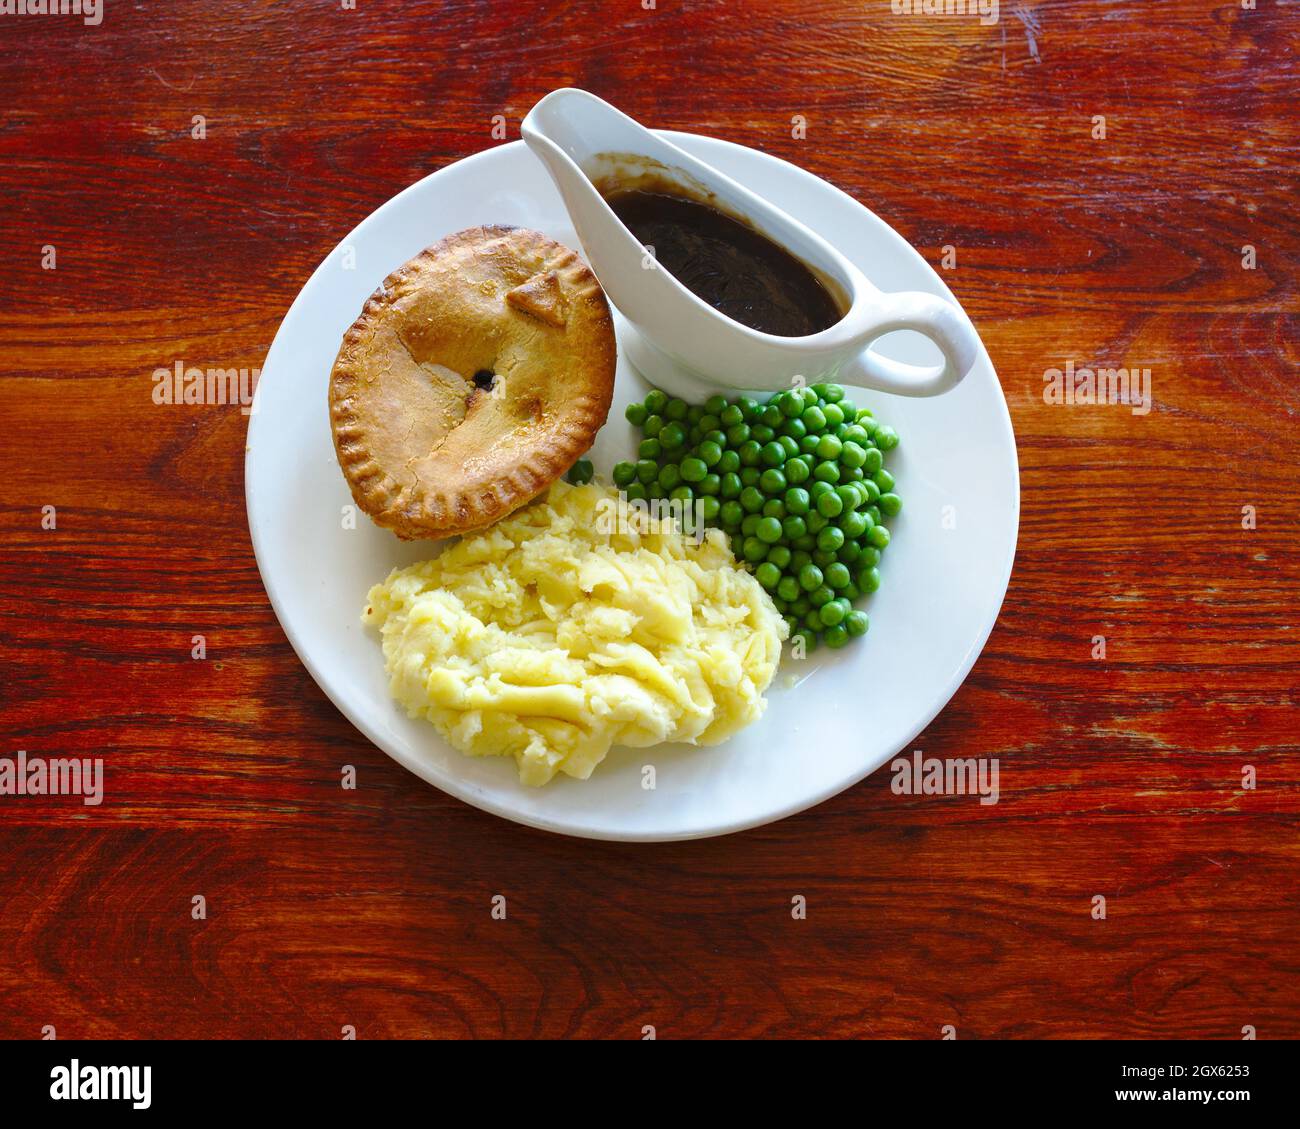 Traditional English meal pie and mashed potato Stock Photo